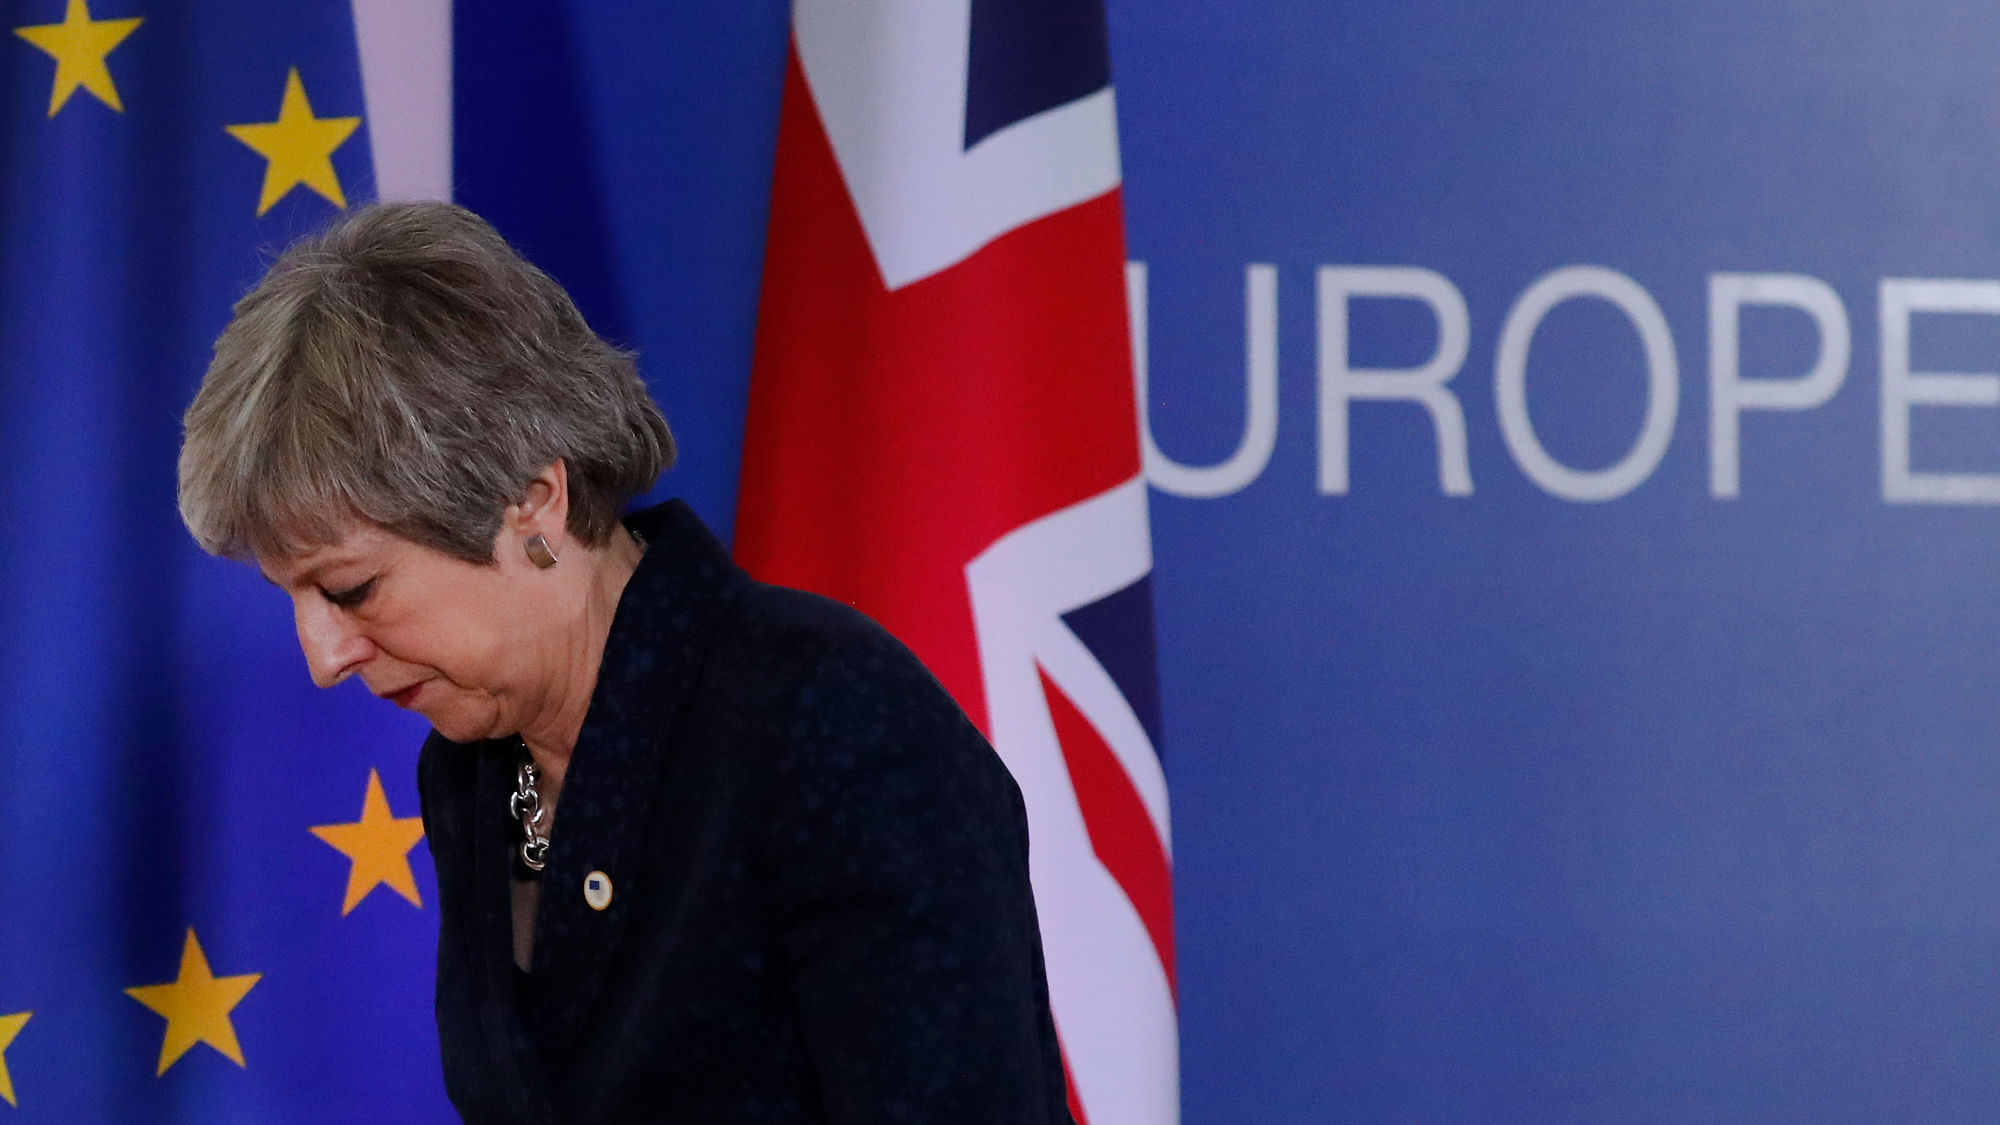 British PM Theresa May leaves after addressing a media conference at an EU summit in Brussels, Friday, 22 March.